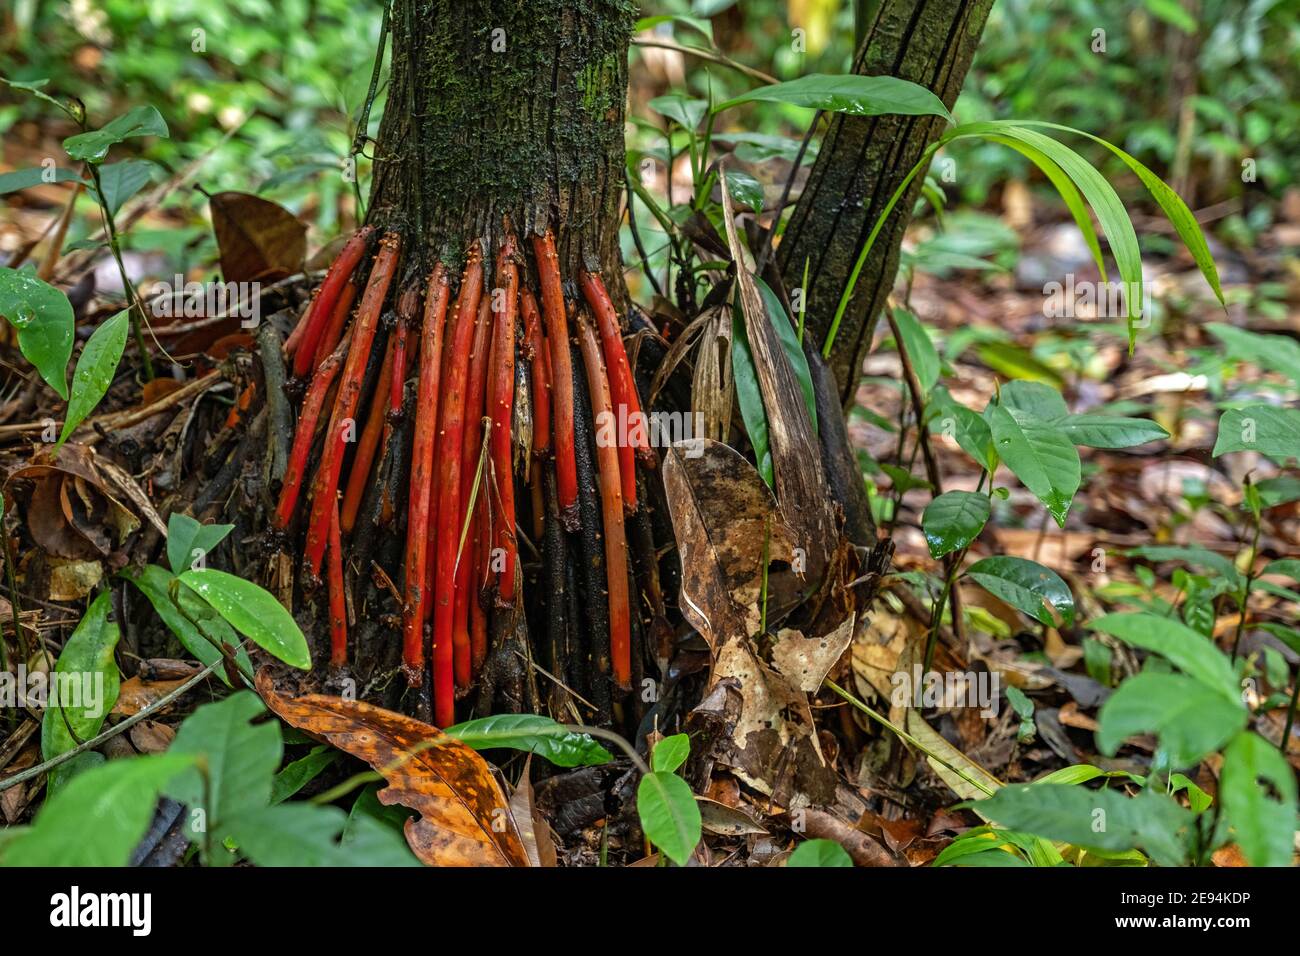 Red aerial roots of the açaí palm tree (Euterpe oleracea) in tropical rainforest / rain forest / jungle in South America Stock Photo